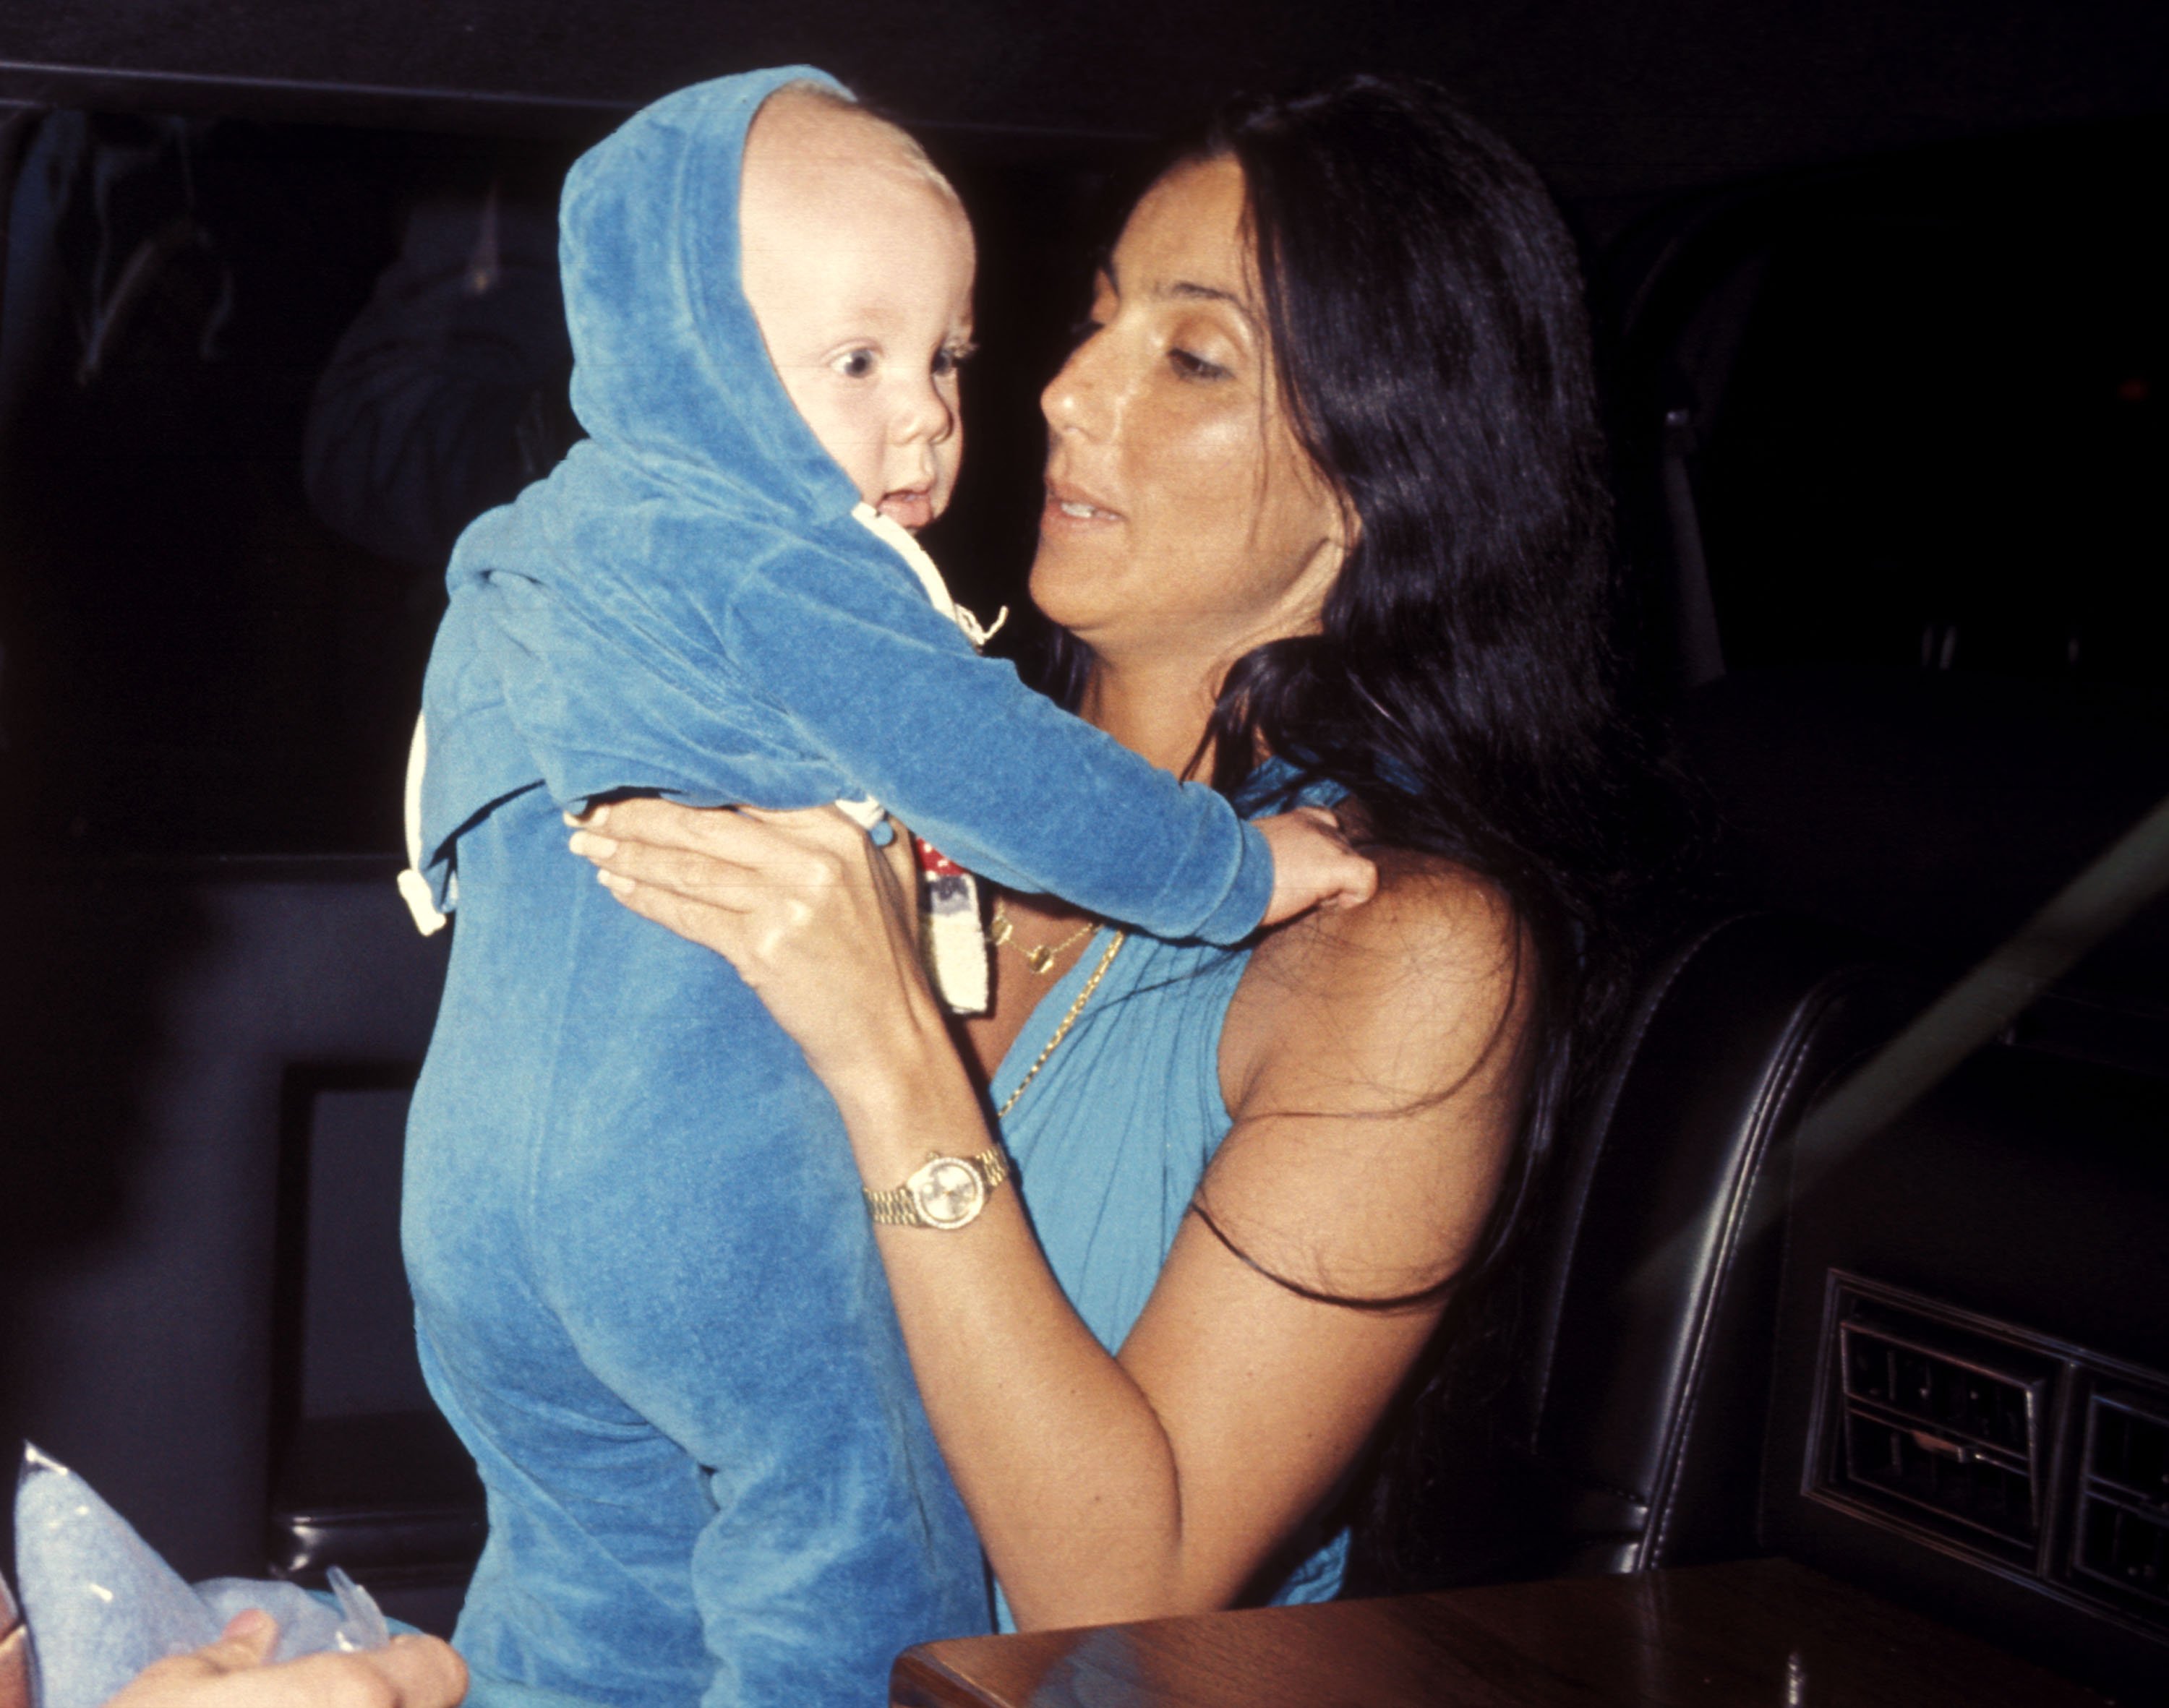 Singer Cher and son Elijah Blue Allman on March 20, 1977 at Los Angeles International Airport in Los Angeles, California. | Source: Getty Images 